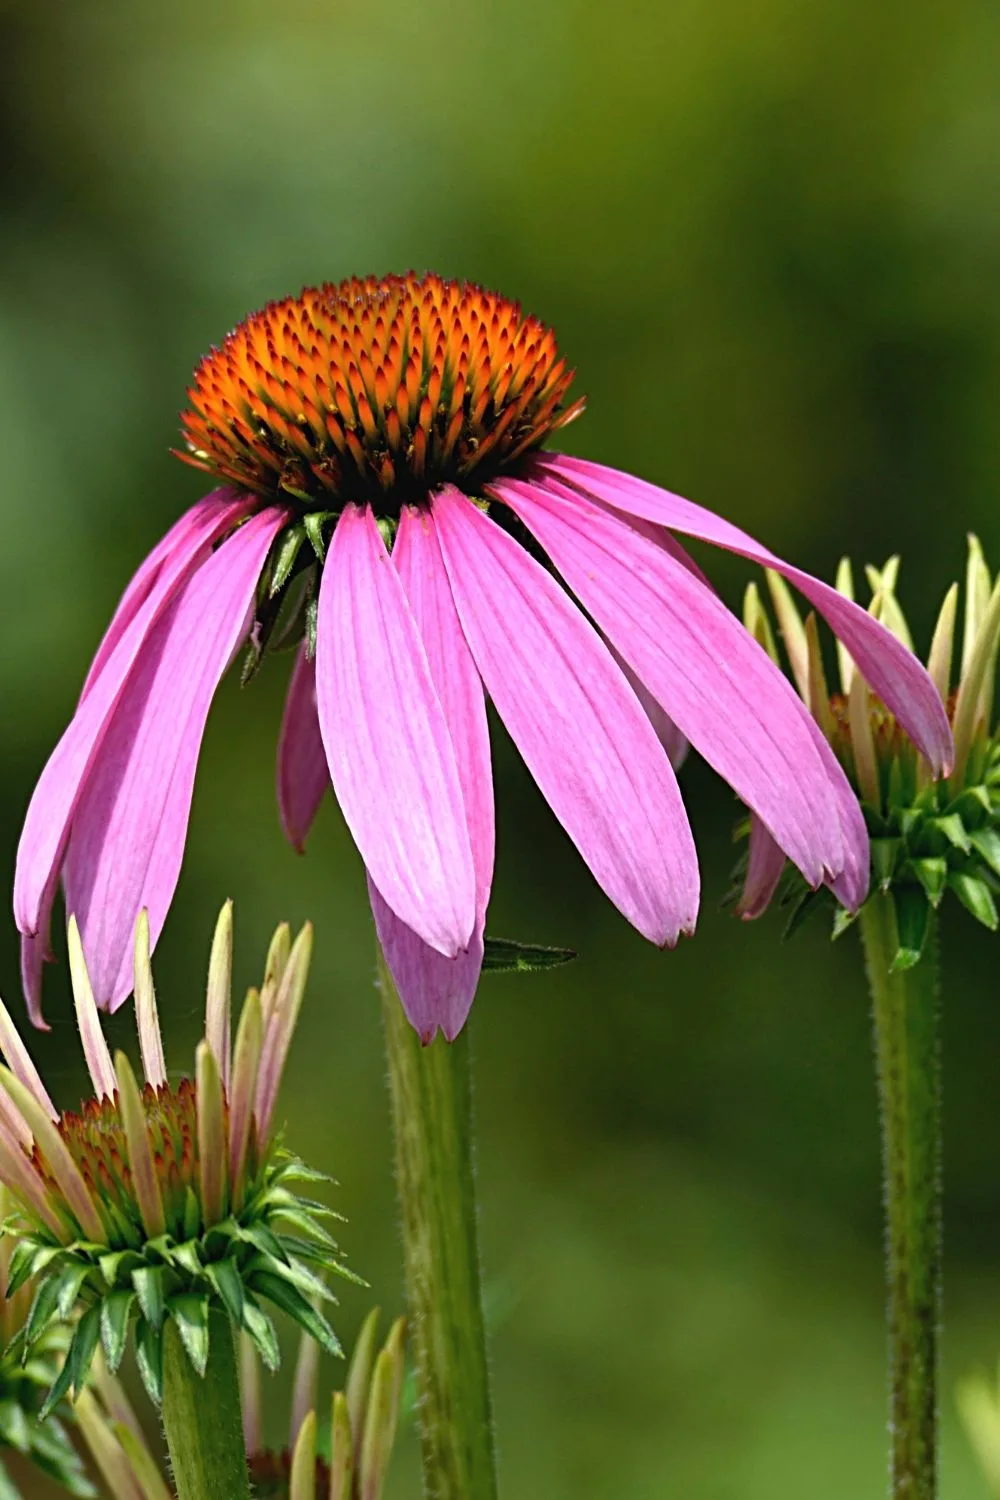 Purple Coneflower is part of the Sunflower family of plants that you can easily blend into your southeast facing garden